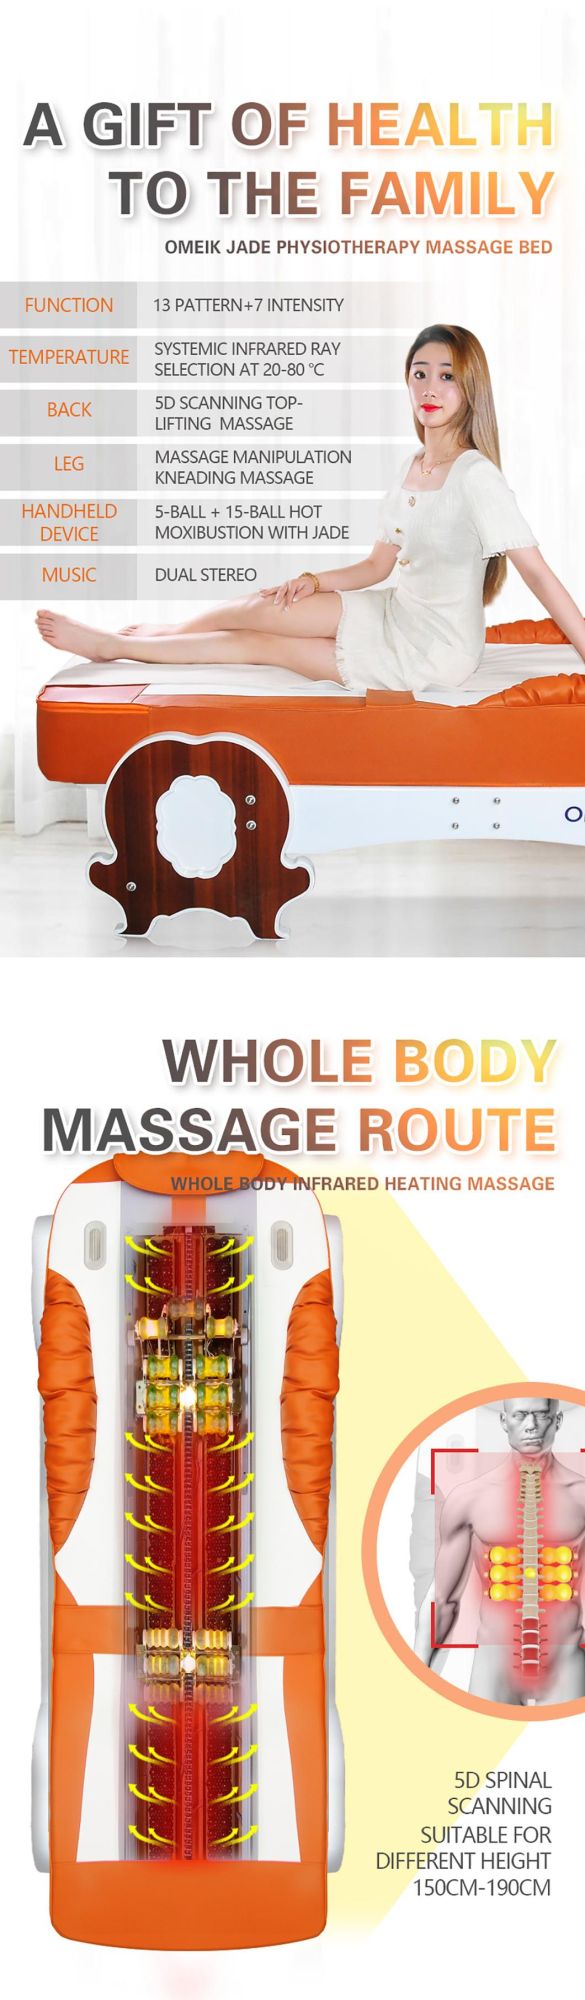 Whole Body Far Infrared Treatment Warm Jade Heating Relexing Massage Bed